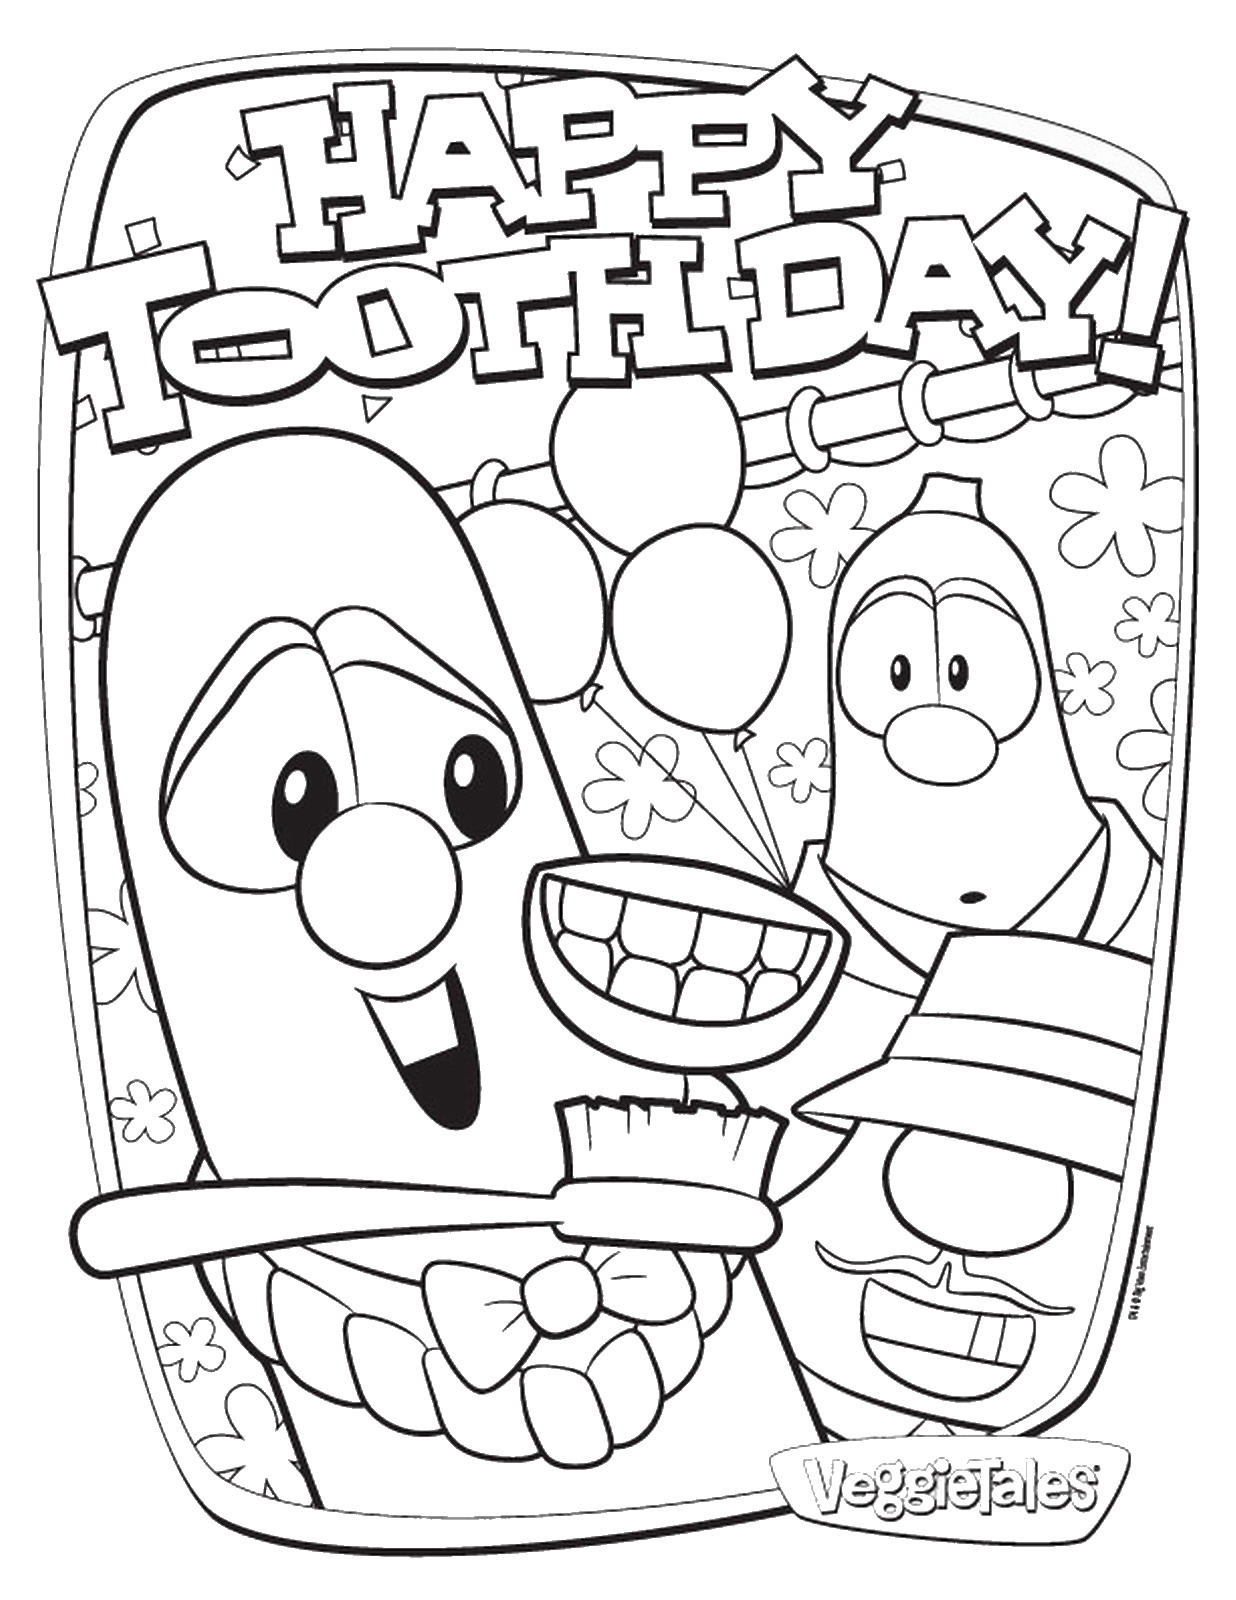 veggie-tales-coloring-pages